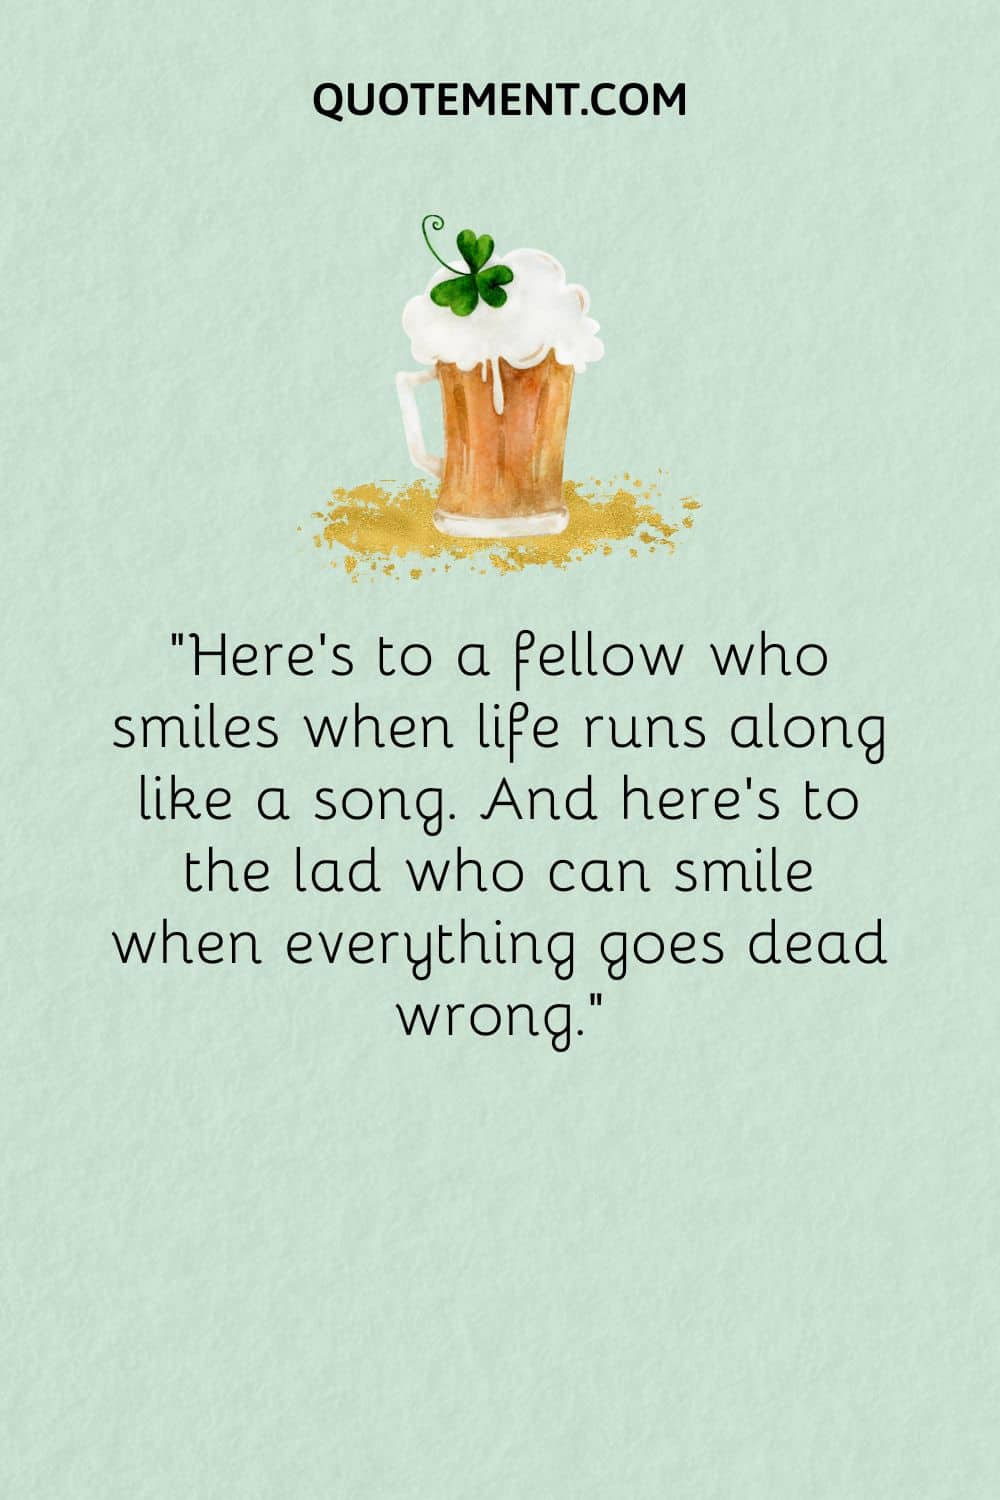 Here’s to a fellow who smiles when life runs along like a song.